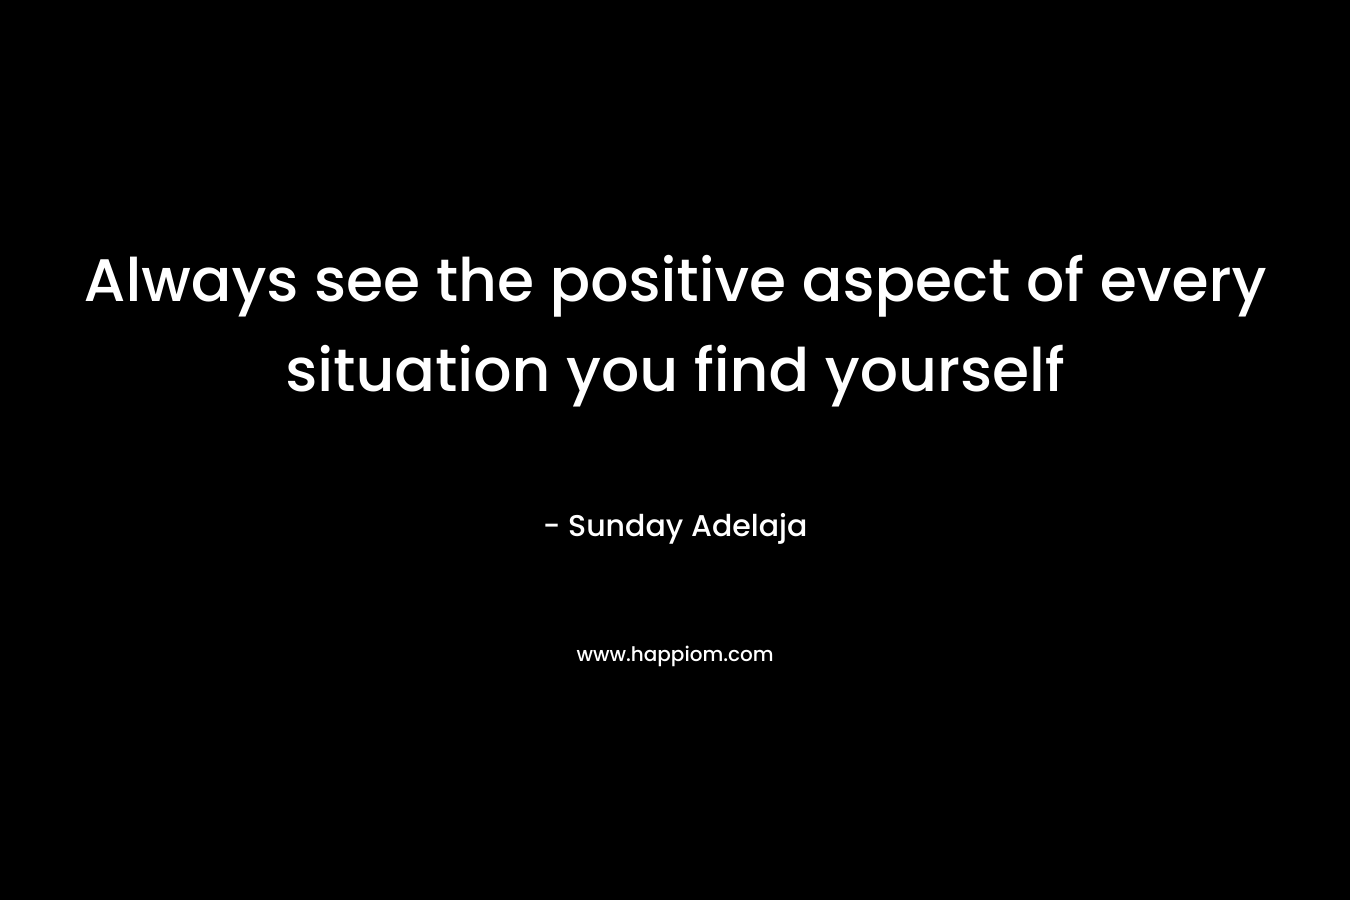 Always see the positive aspect of every situation you find yourself